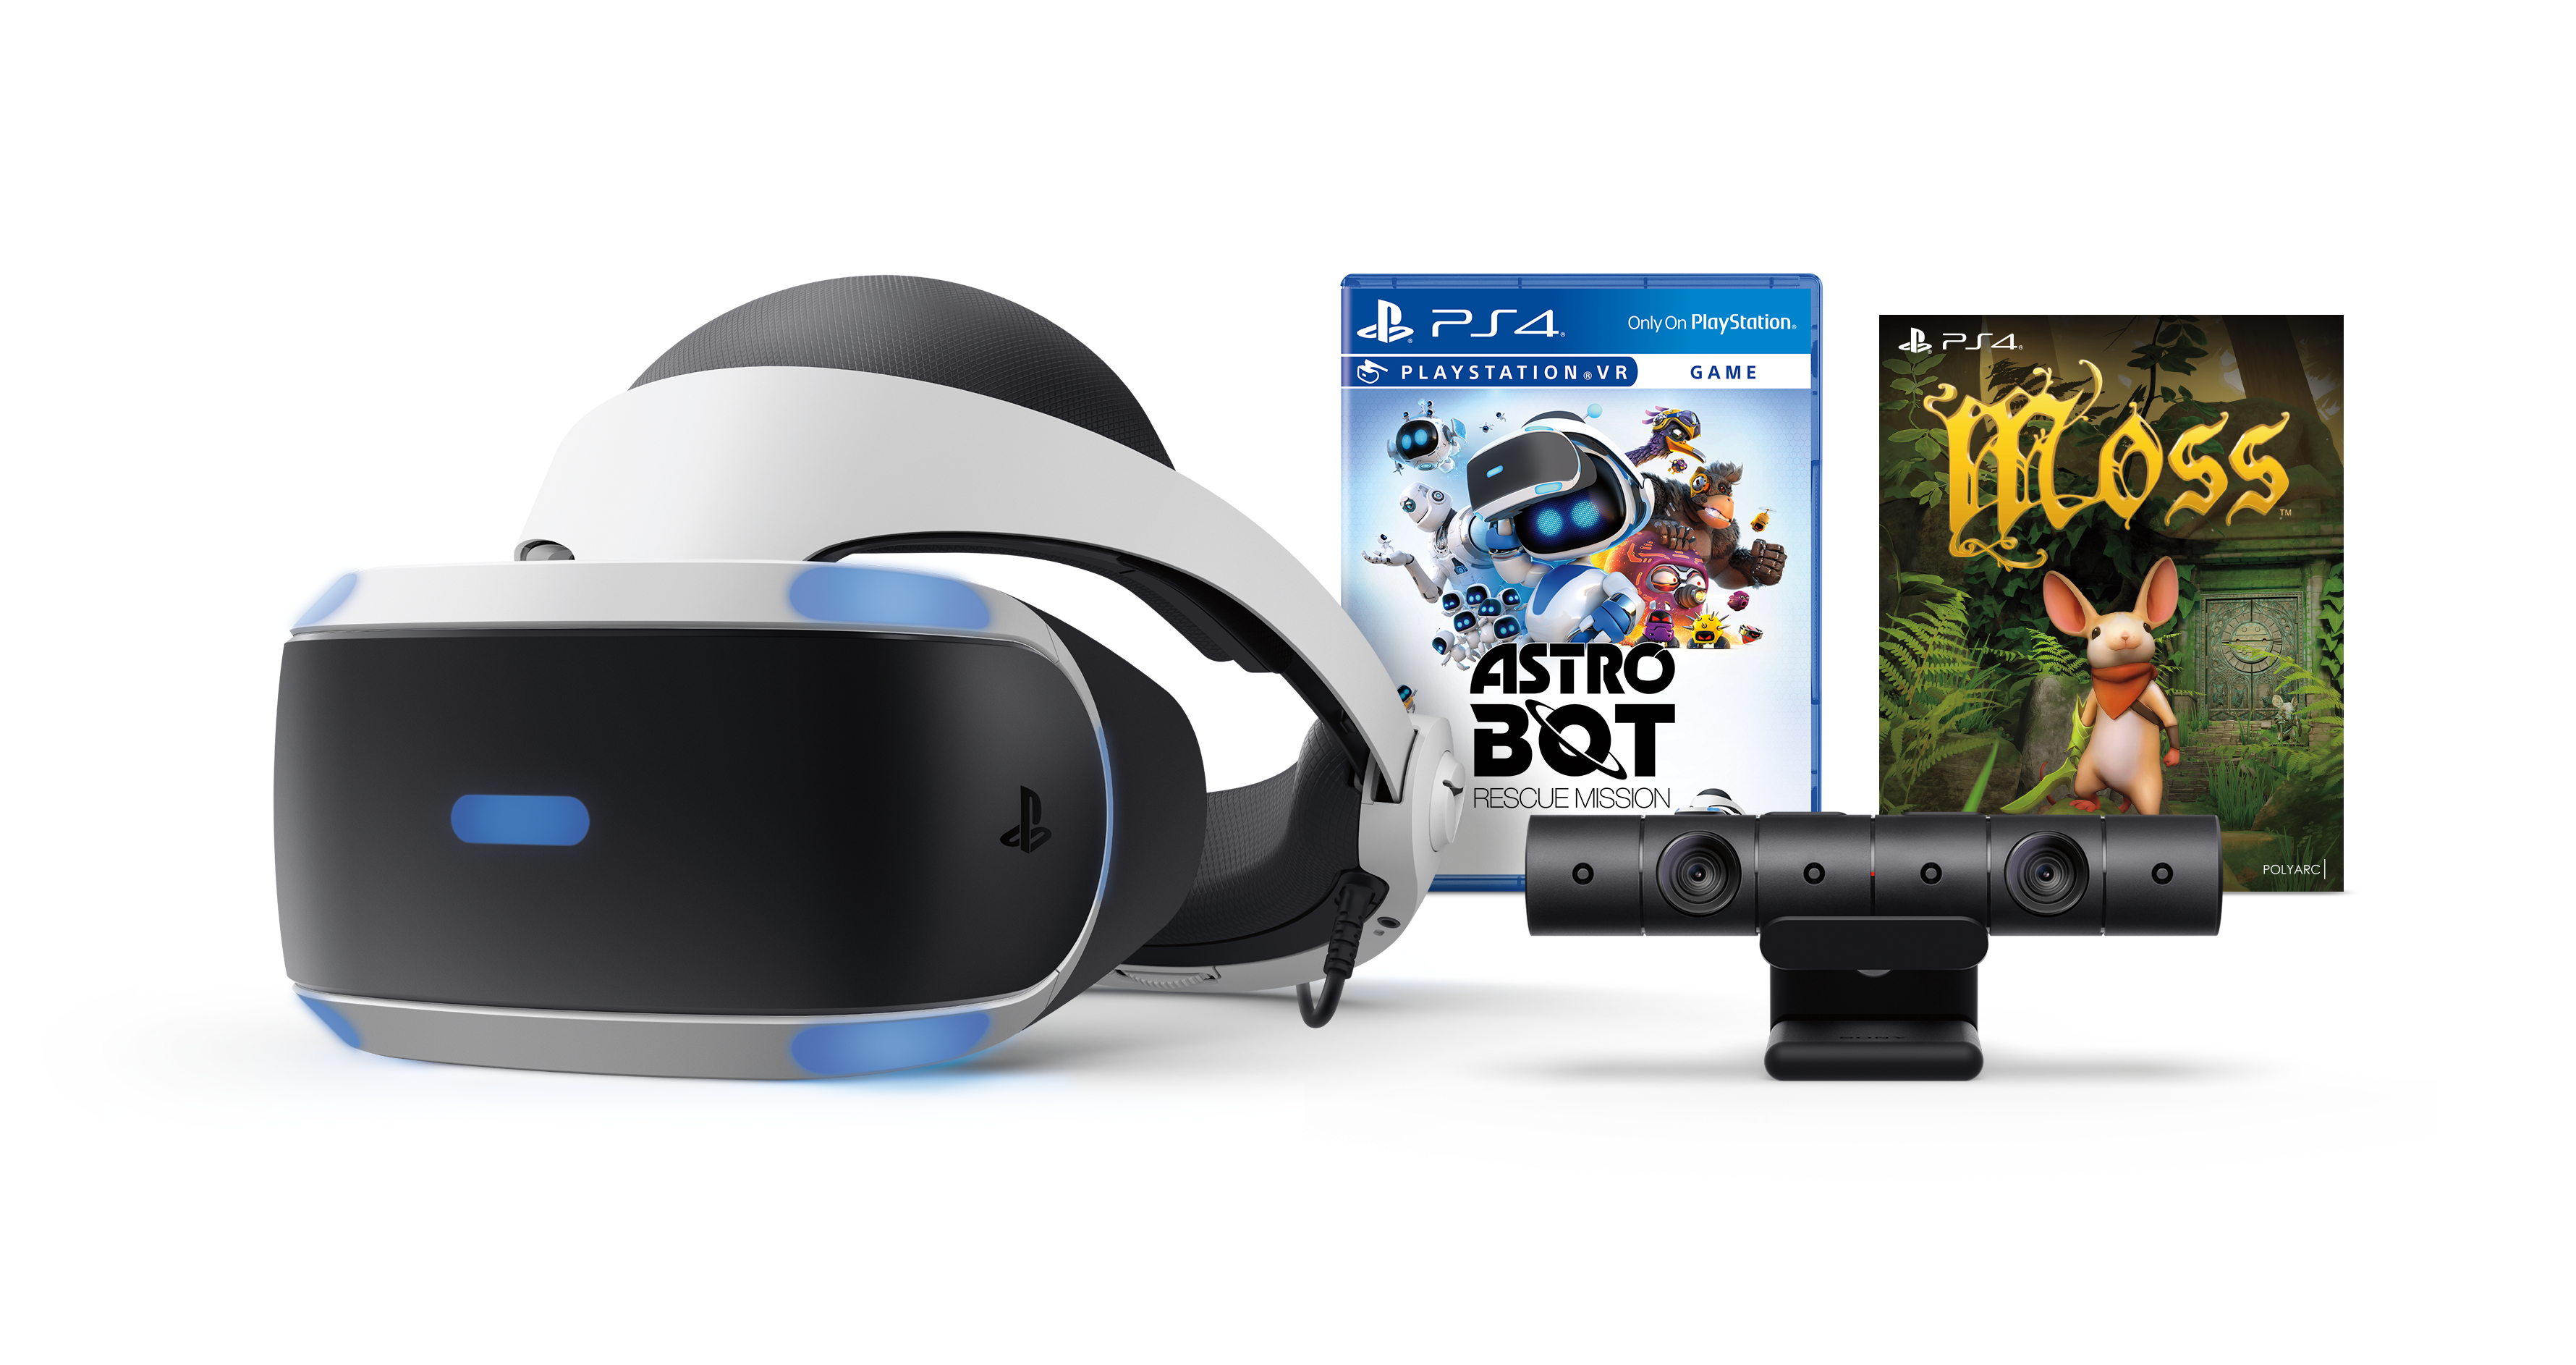 Sony PlayStation 4 VR, ASTRO BOT Rescue Mission + Moss Bundle, Black, 3003468 - image 1 of 2